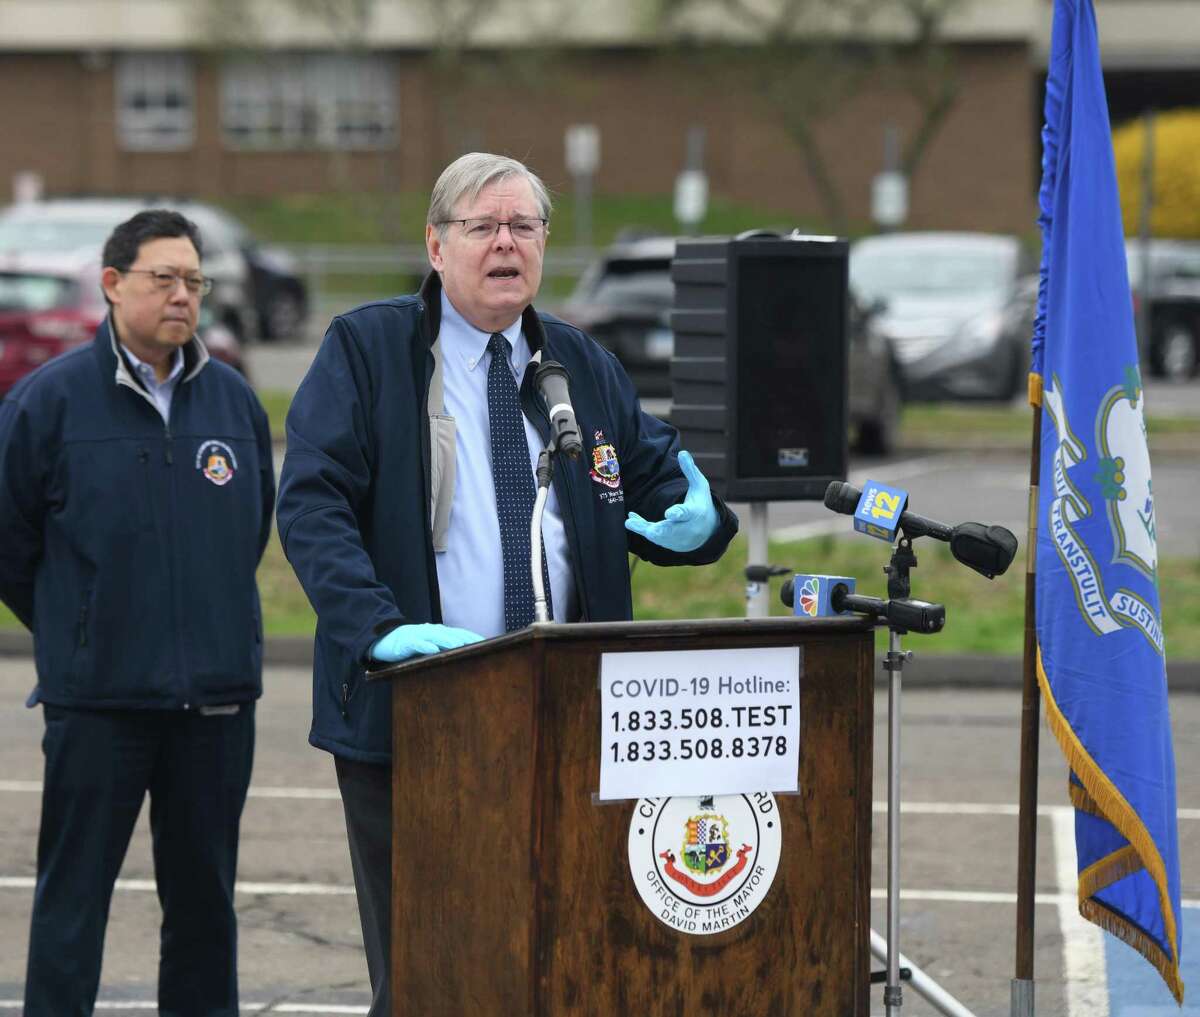 Stamford Mayor David Martin speaks about the coronavirus situation at the new testing center at Westhill High School in Stamford, Conn. Monday, March 30, 2020. The new COVID-19 drive-thru testing site will begin operation on Tuesday, joining three others already operating in Stamford. In addition, the mayor announced a new hotline number, 1-833-508-TEST, to provide a smoother transition for residents seeking testing.